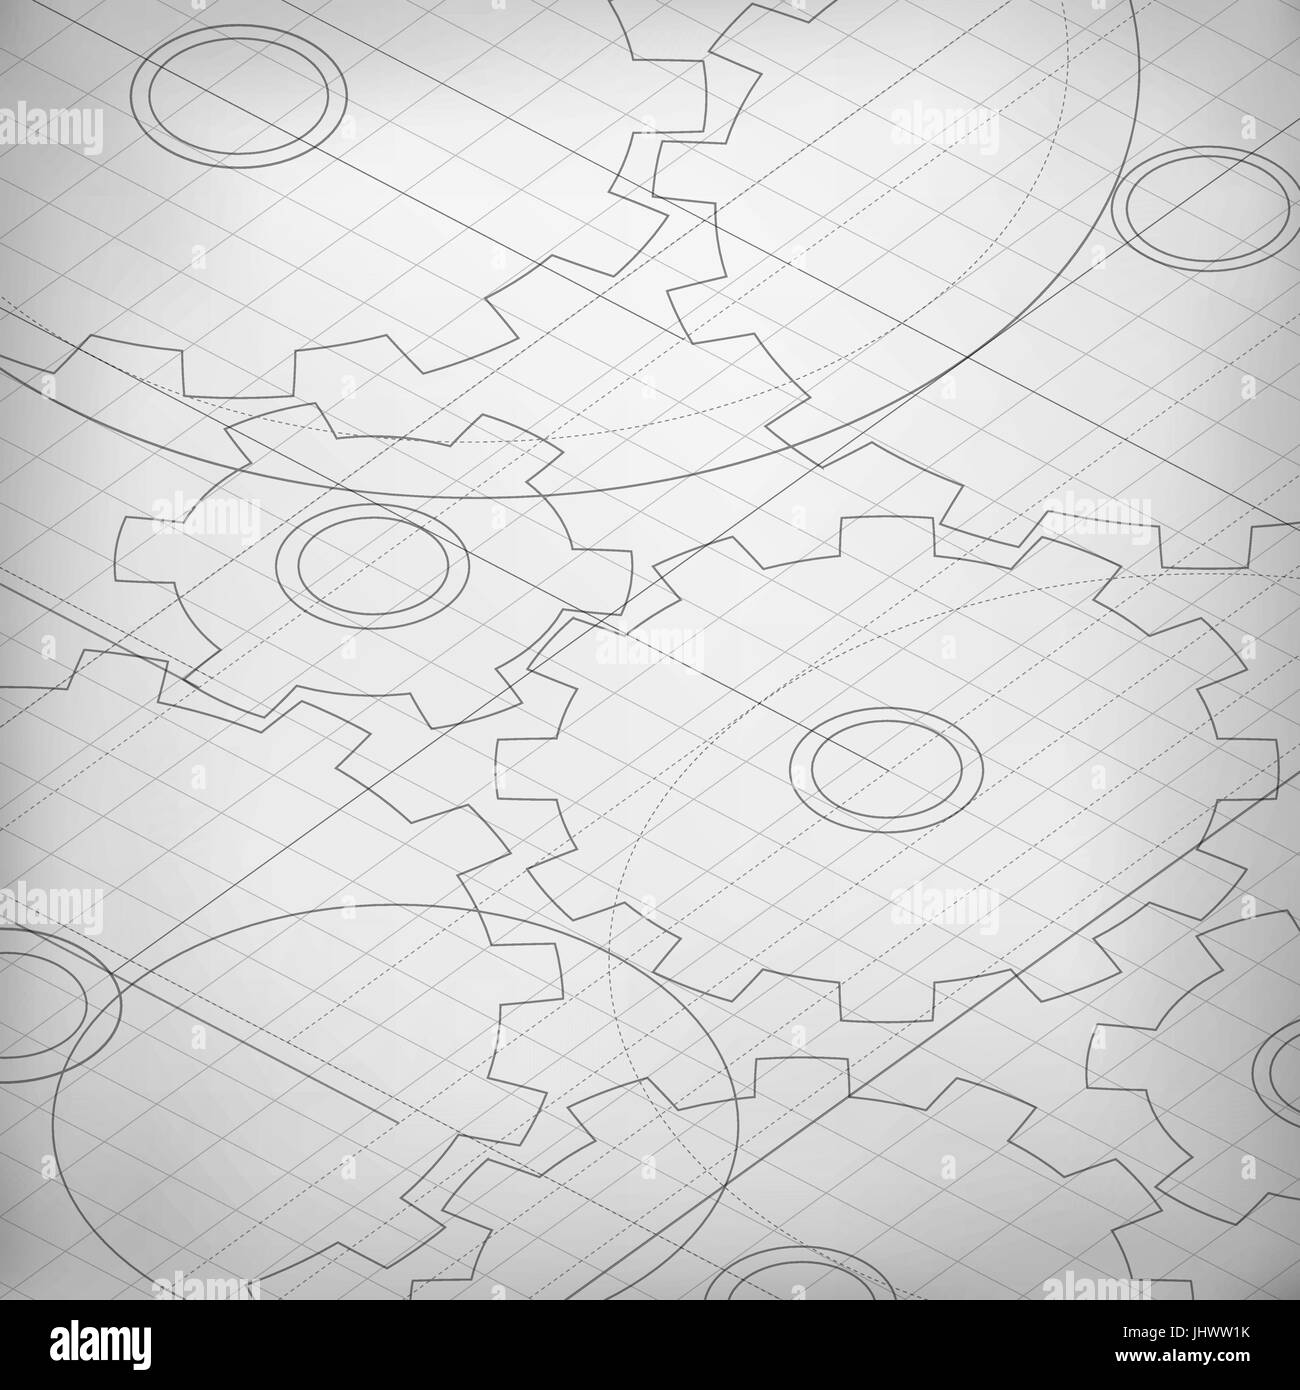 Blueprint of cogwheels. Engineer and architect background. Technology abstract background. Monochrome background Stock Vector